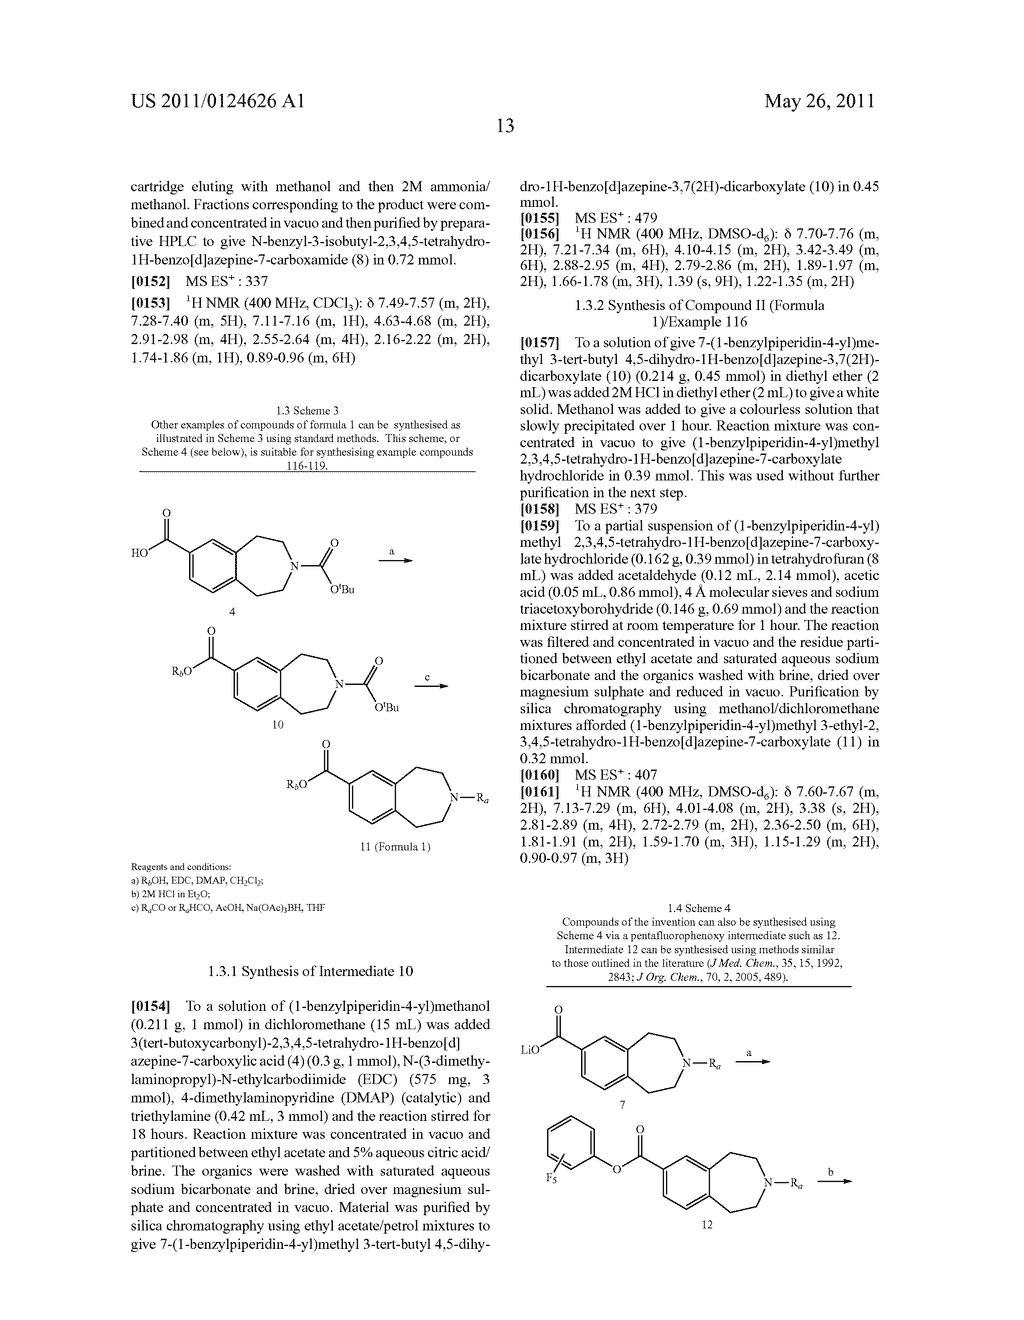 BENZAZEPINE DERIVATIVES AND THEIR USE AS HISTAMINE H3 ANTAGONISTS - diagram, schematic, and image 14